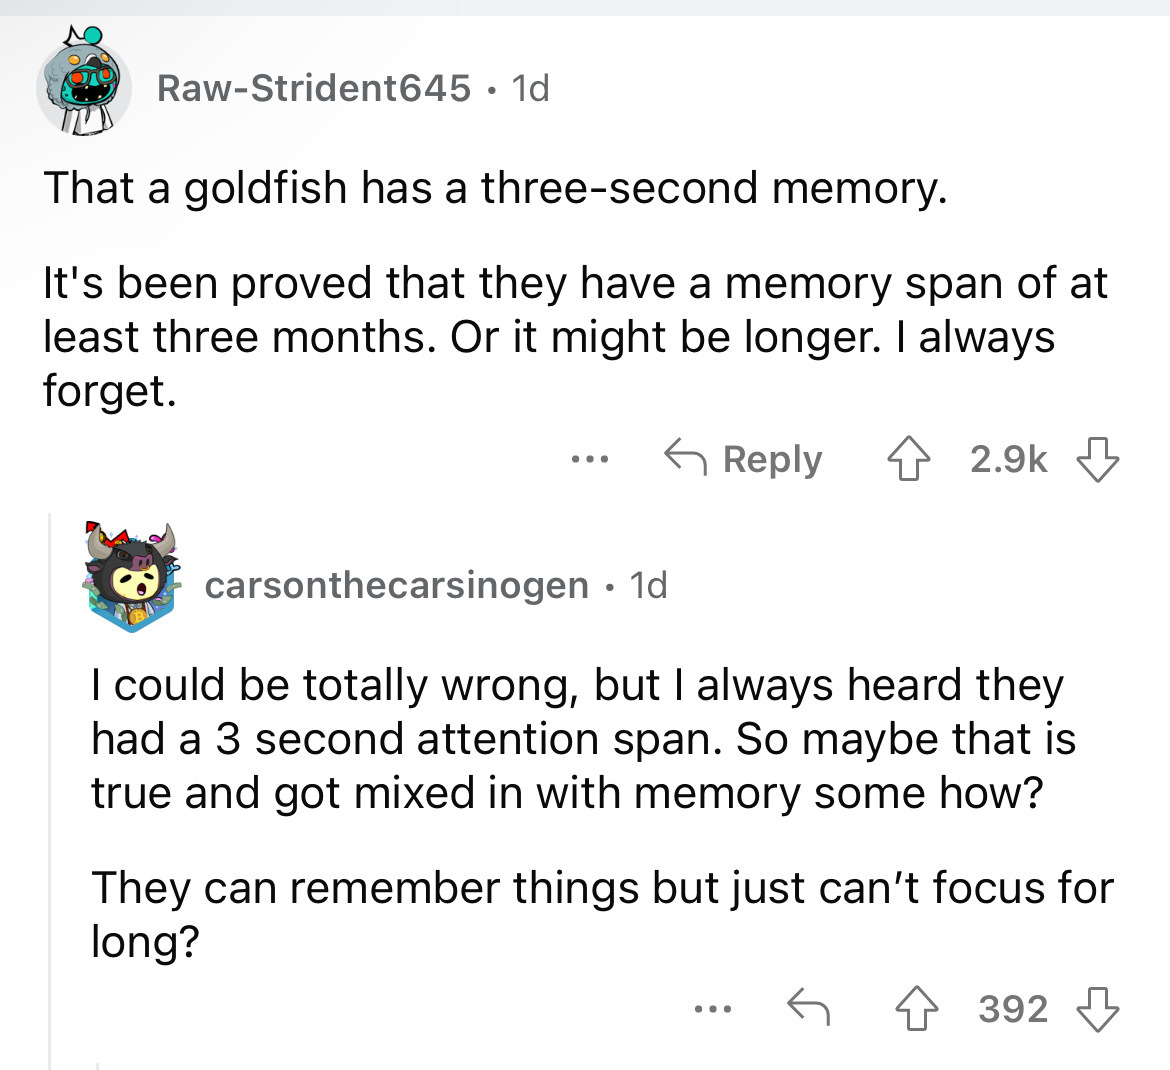 document - RawStrident645 1d That a goldfish has a threesecond memory. It's been proved that they have a memory span of at least three months. Or it might be longer. I always forget. ... carsonthecarsinogen. 1d I could be totally wrong, but I always heard